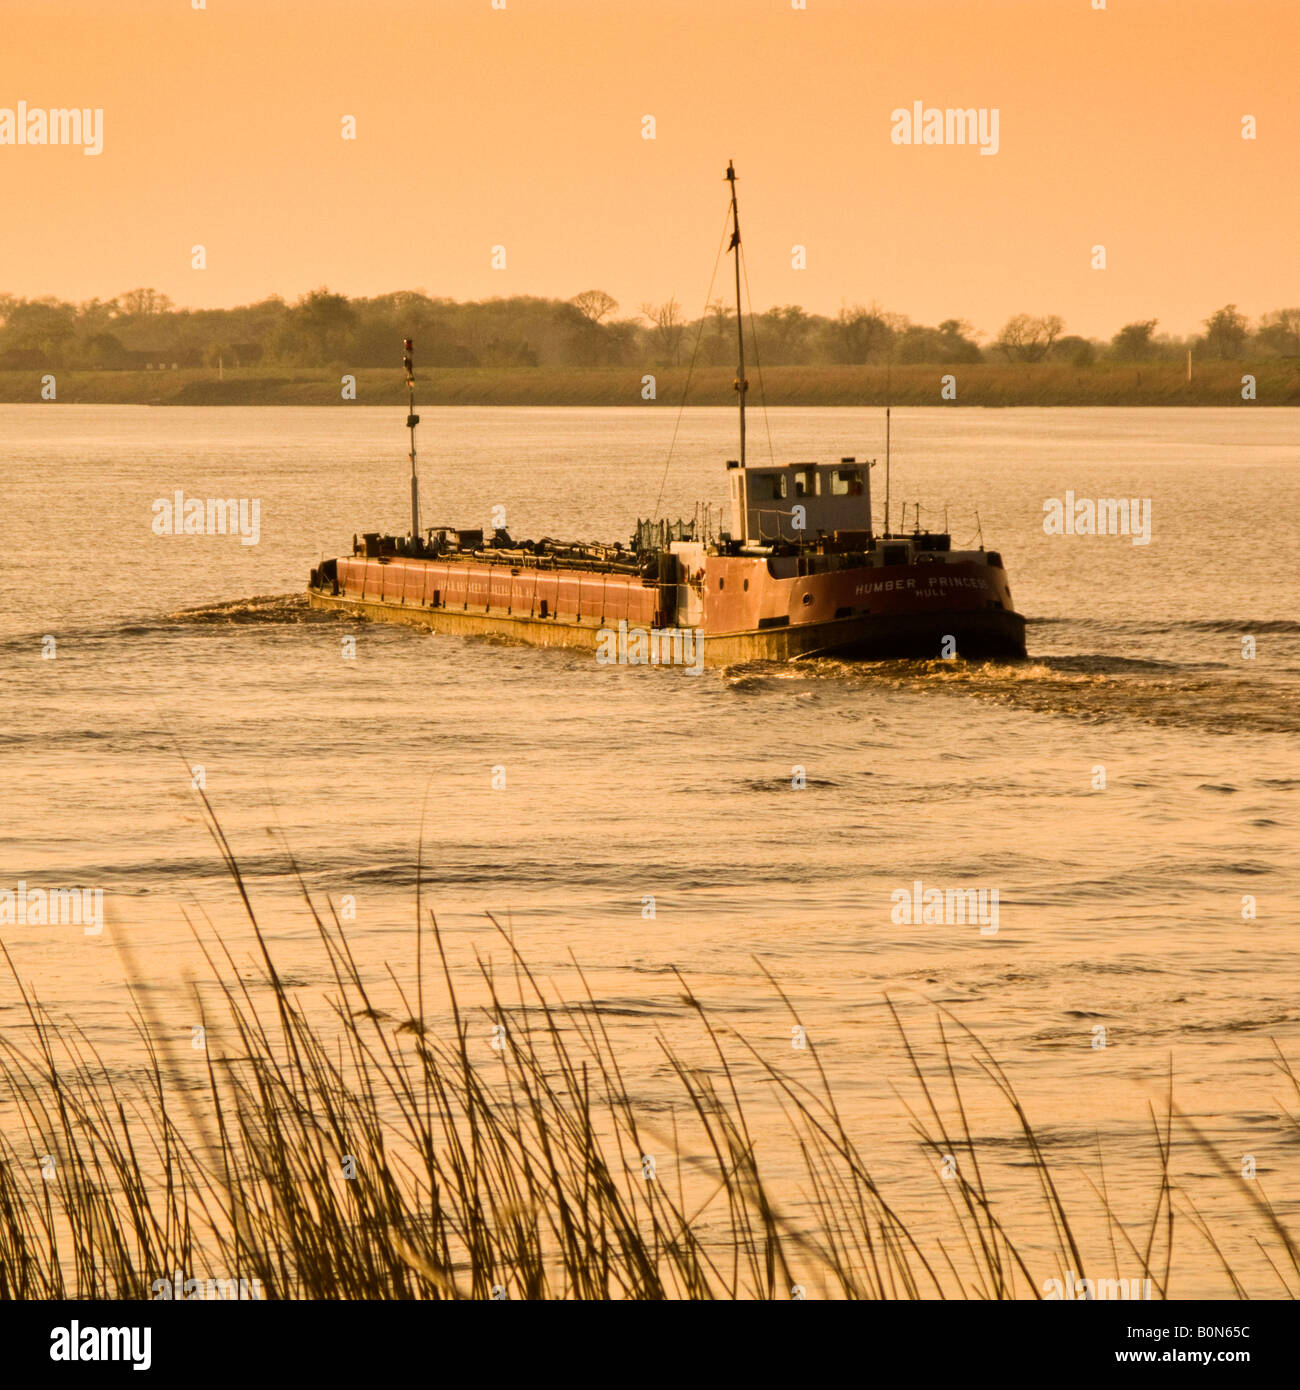 Tanker ship on the tidal River Ouse at Reedness, East Yorkshire, UK Stock Photo